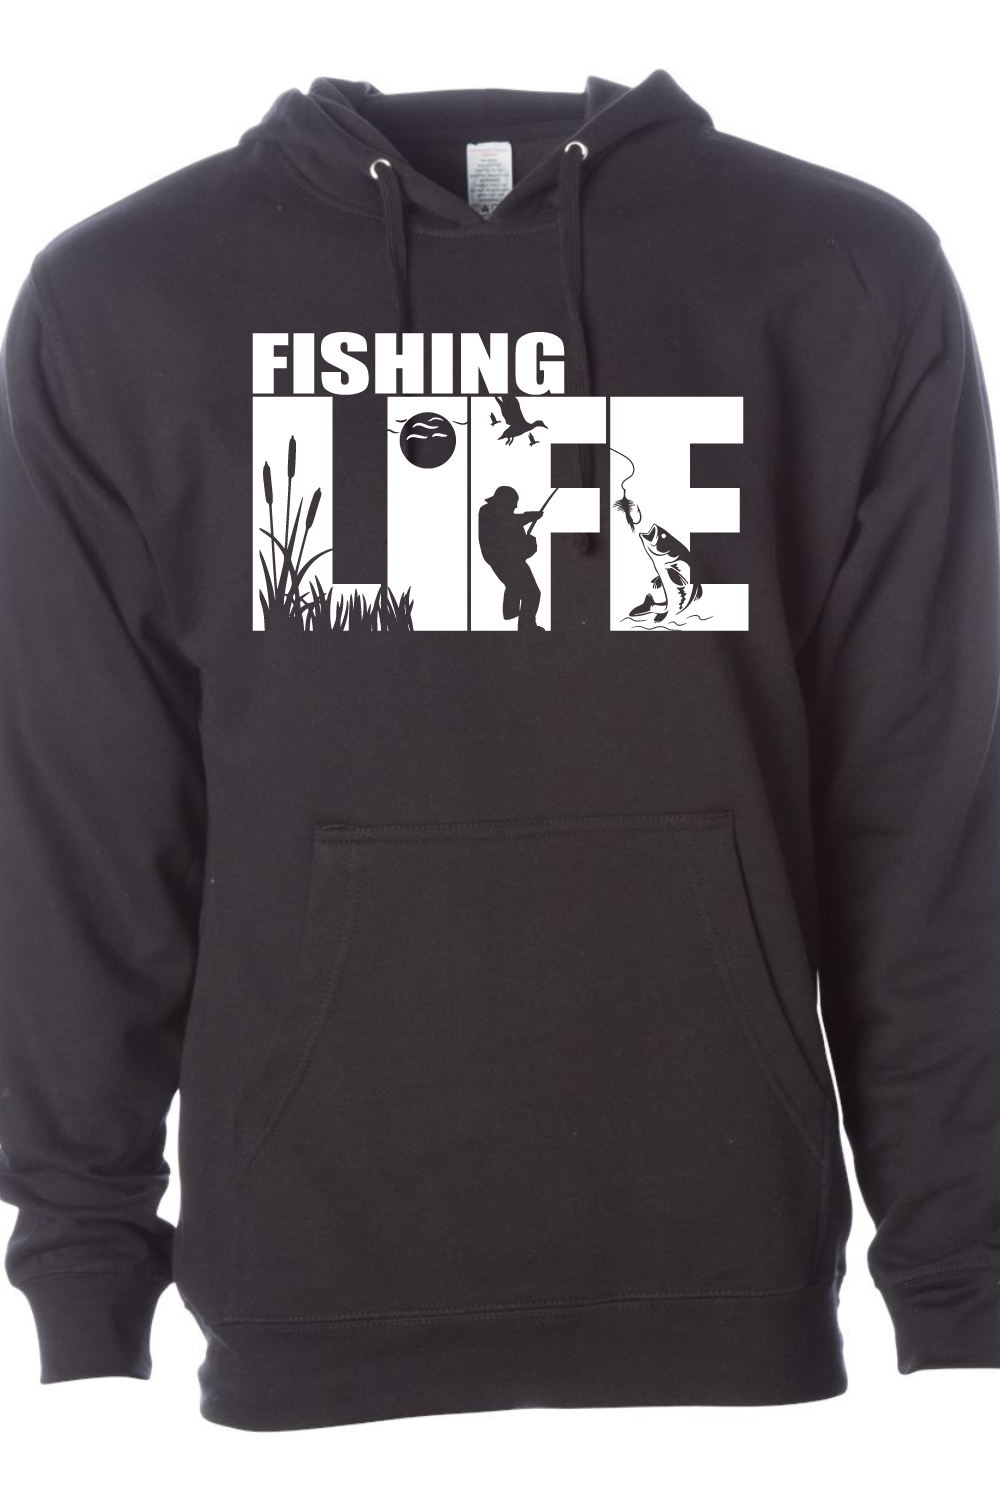 Fishing Life Graphic Design Hooded Pullover Royal / 3XL